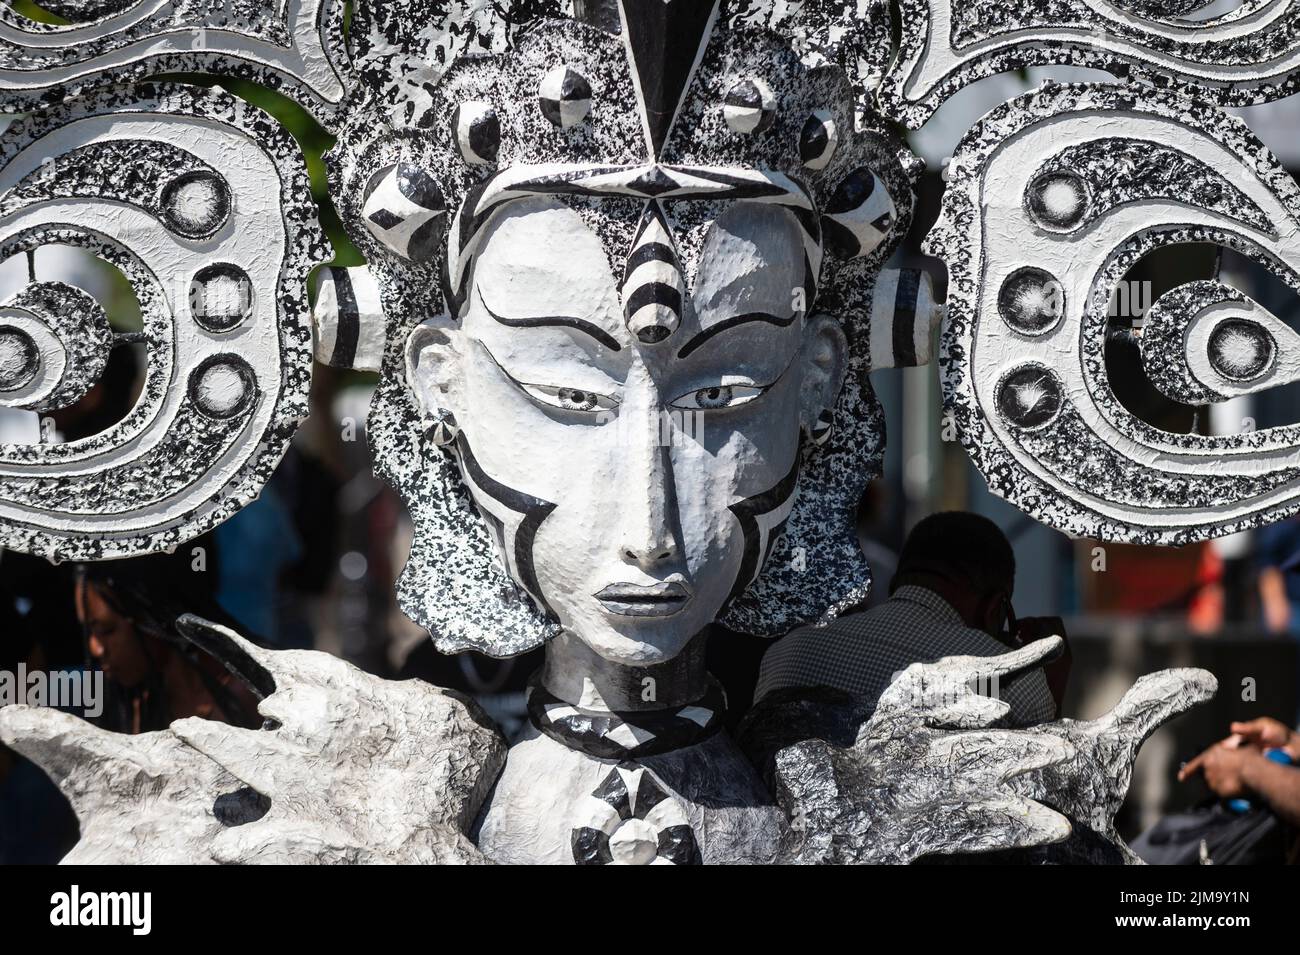 London, UK.  5 August 2022. A carnival arts piece by Carl Gabriel at Carnival in Chelsea, a community event showcasing carnival costumes, music and culture ahead of Notting Hill Carnival.  The show is part of this year’s Kensington & Chelsea Festival.  Credit: Stephen Chung / Alamy Live News Stock Photo